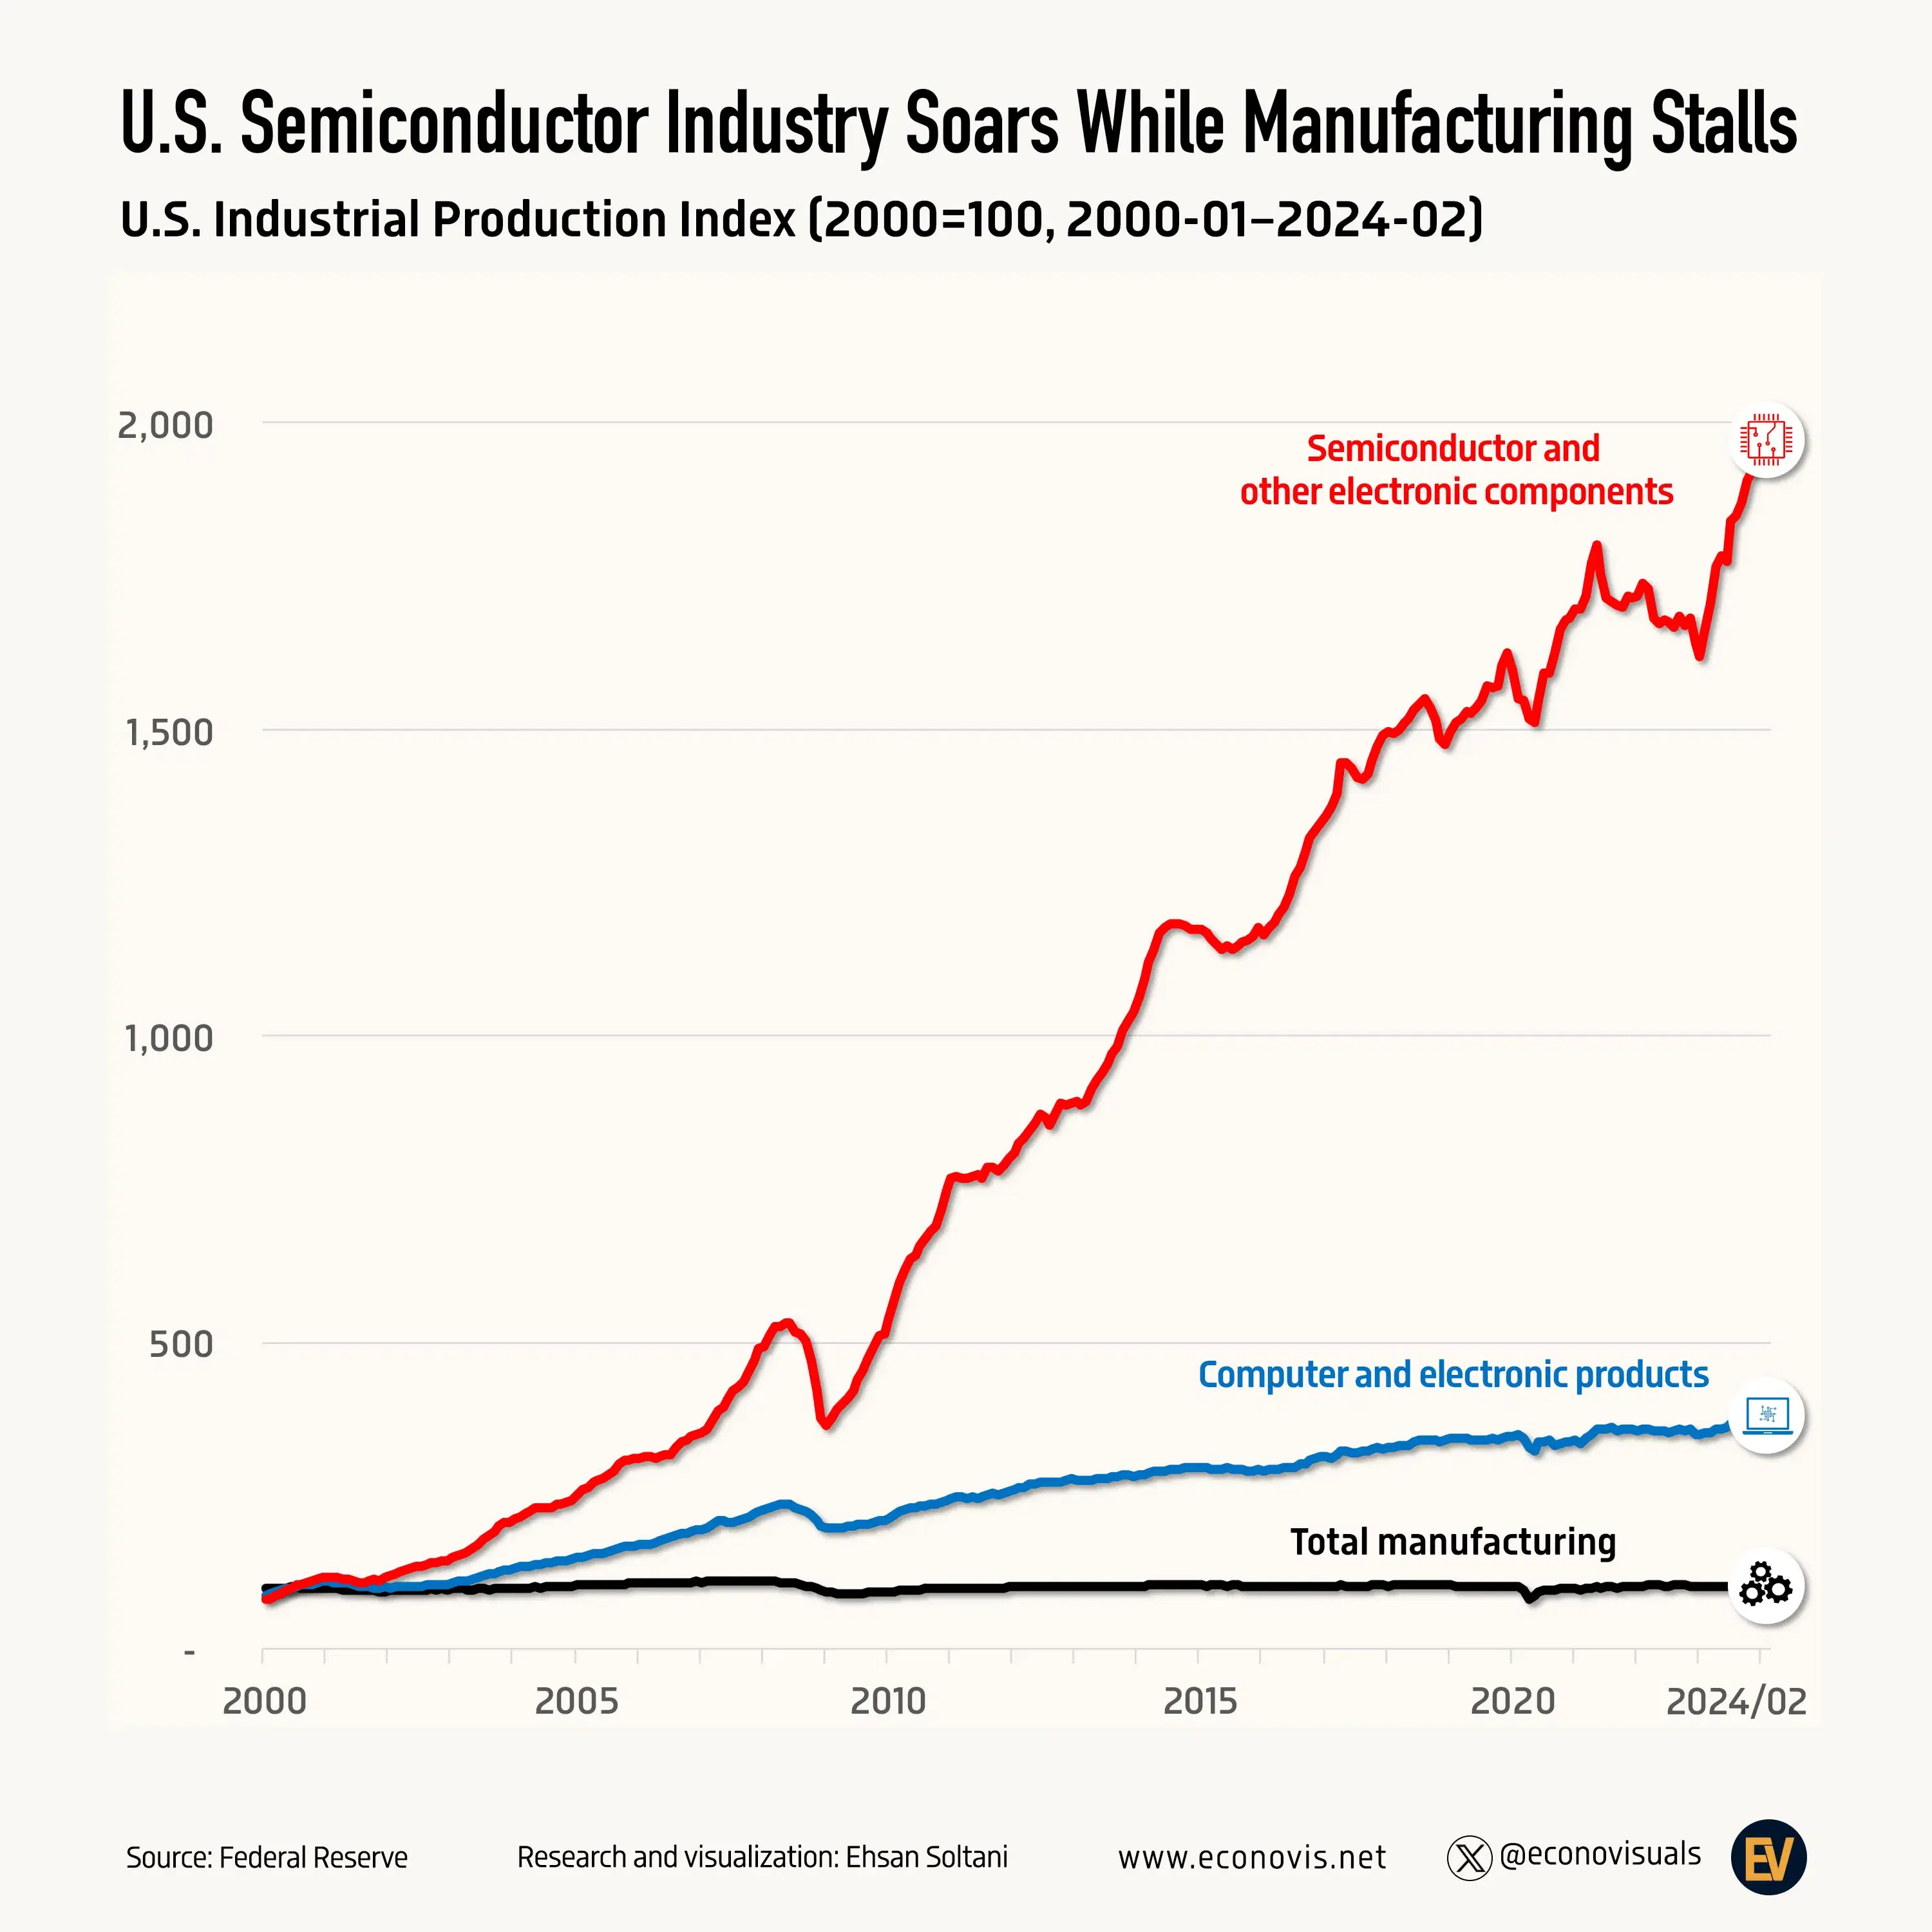 U.S. Semiconductor Industry Soars While Manufacturing Stalls